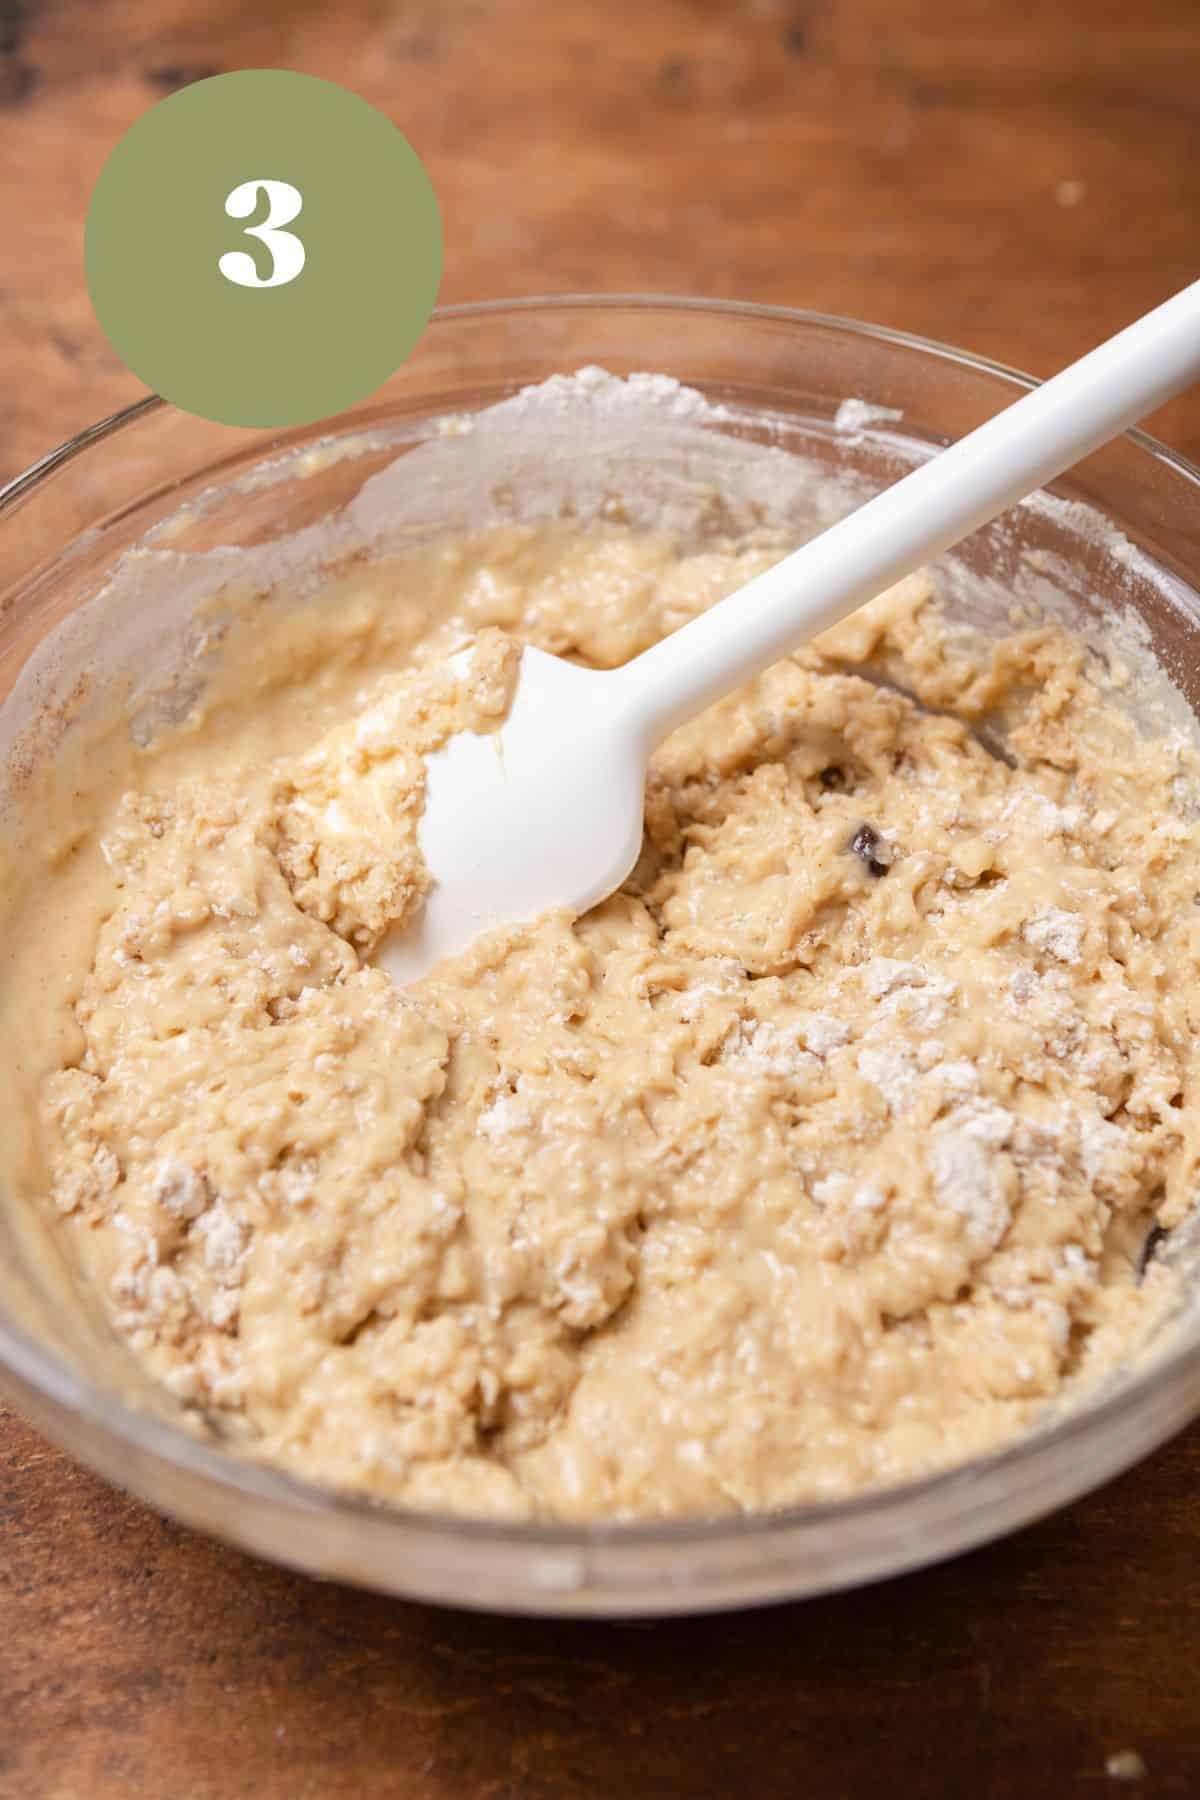 Muffin batter in a large bowl with a rubber spatula.